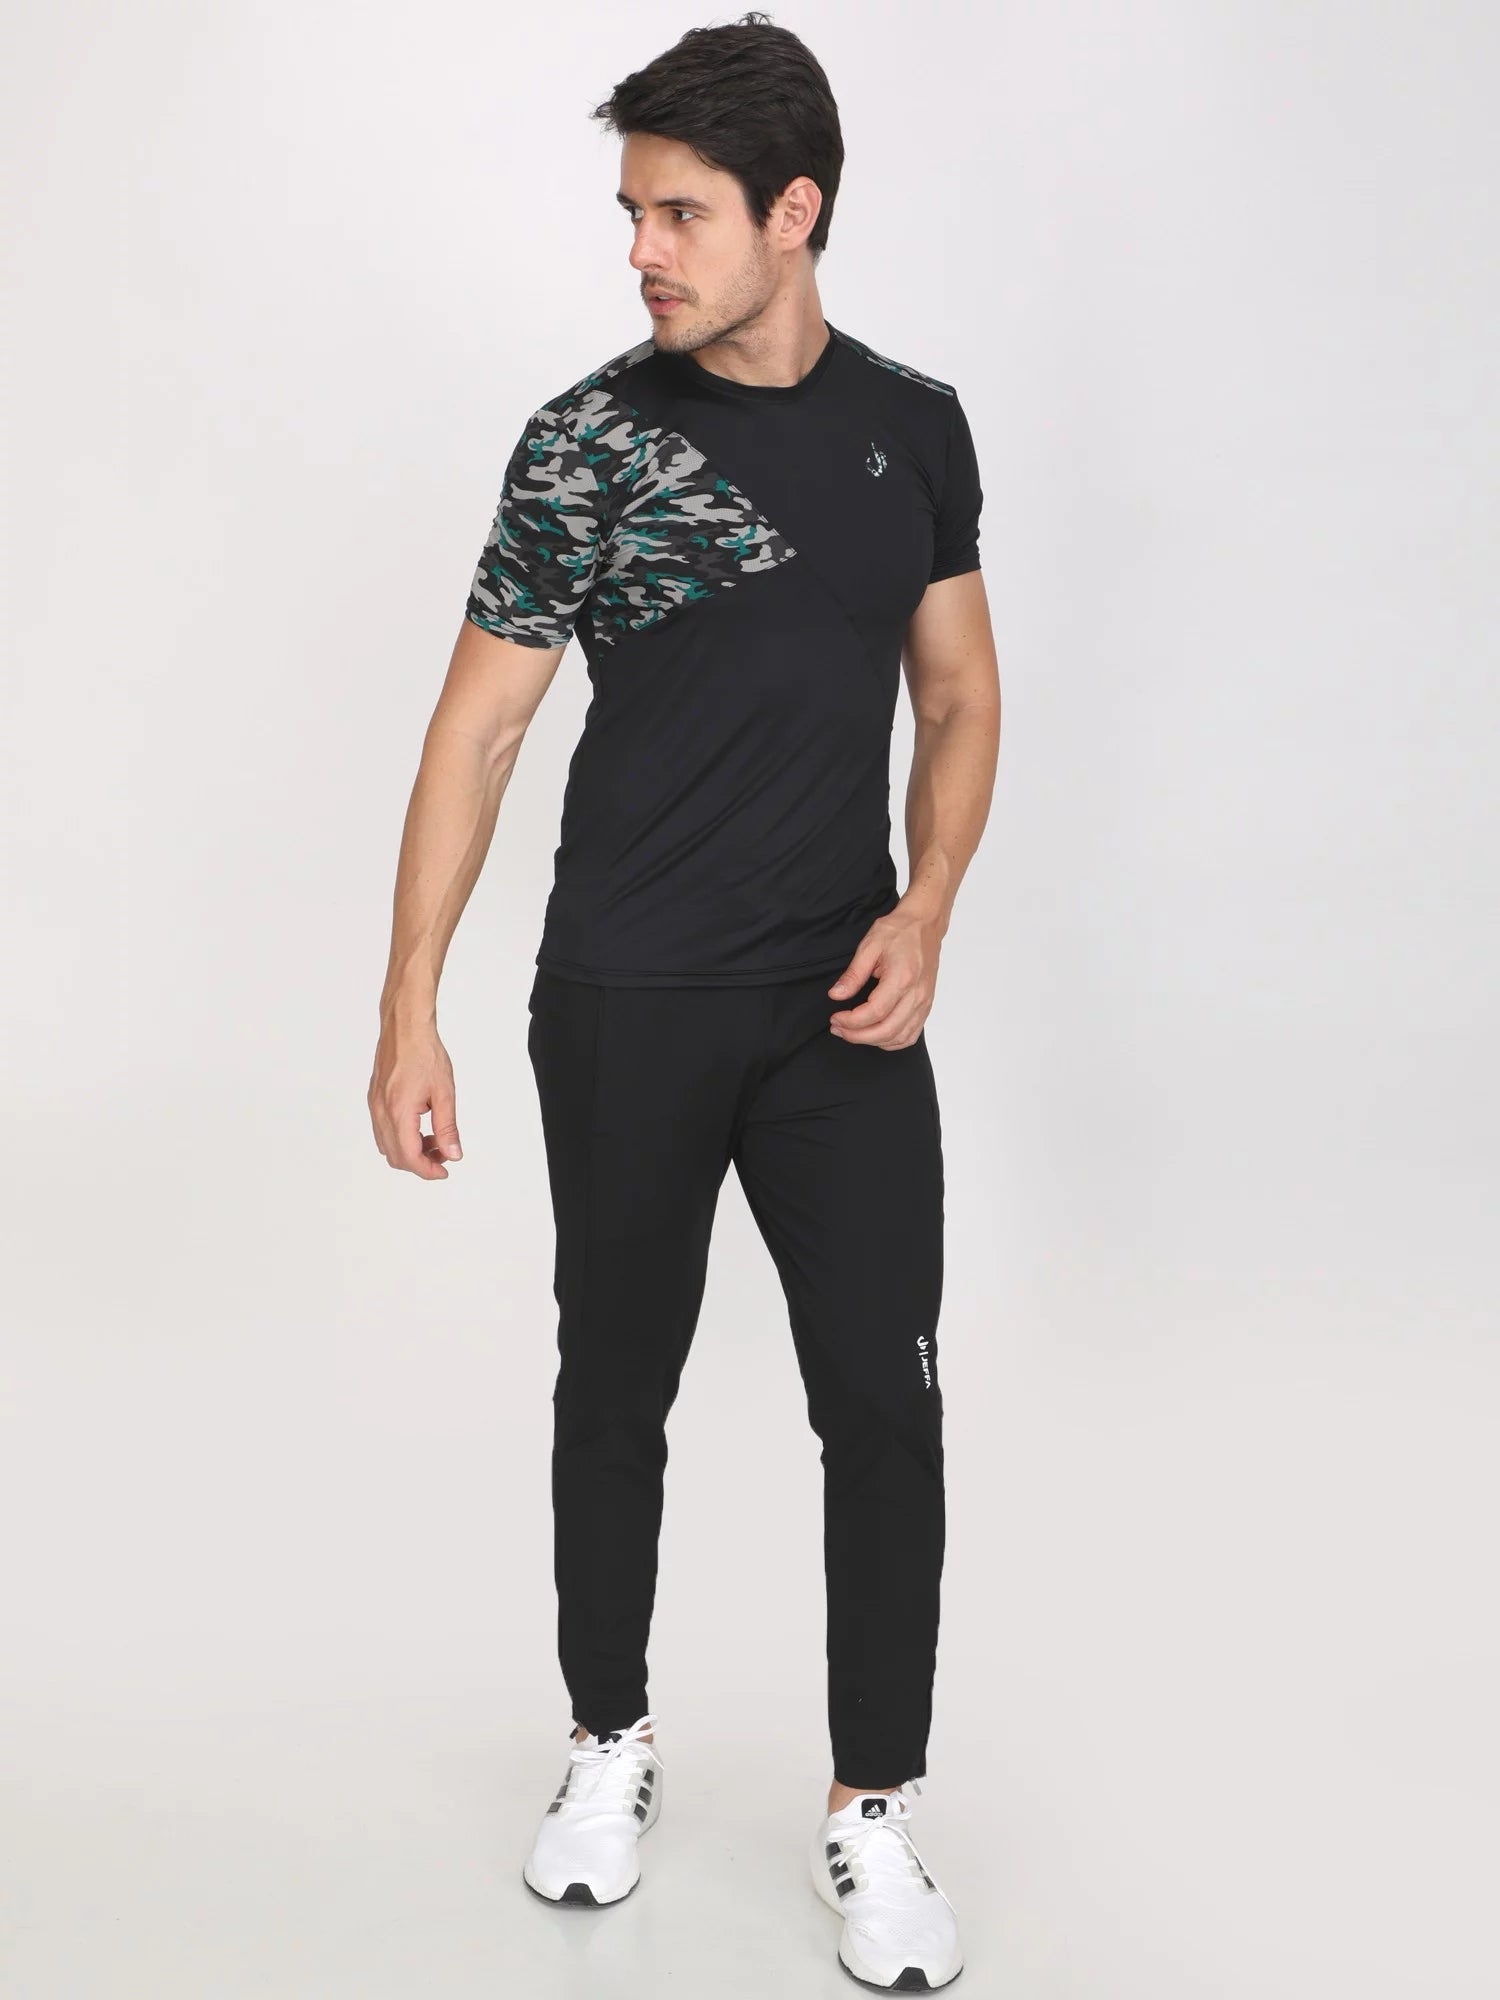 Camouflage Printed T-shirts (Black-Green)